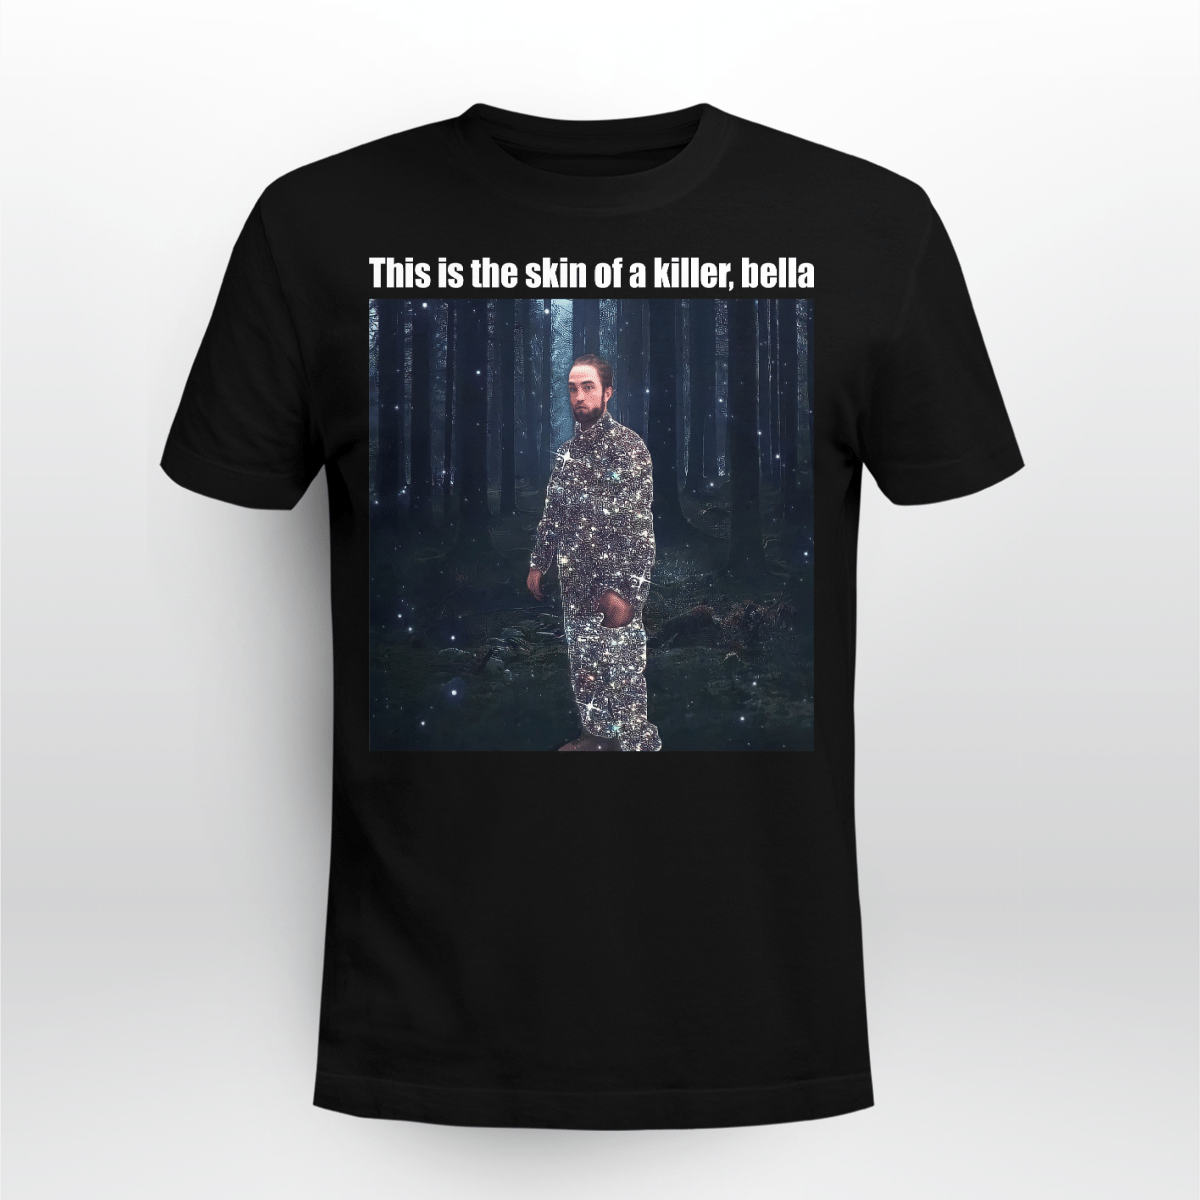 This is the skin of a killer, bella shirt Unisex T-shirt Black S